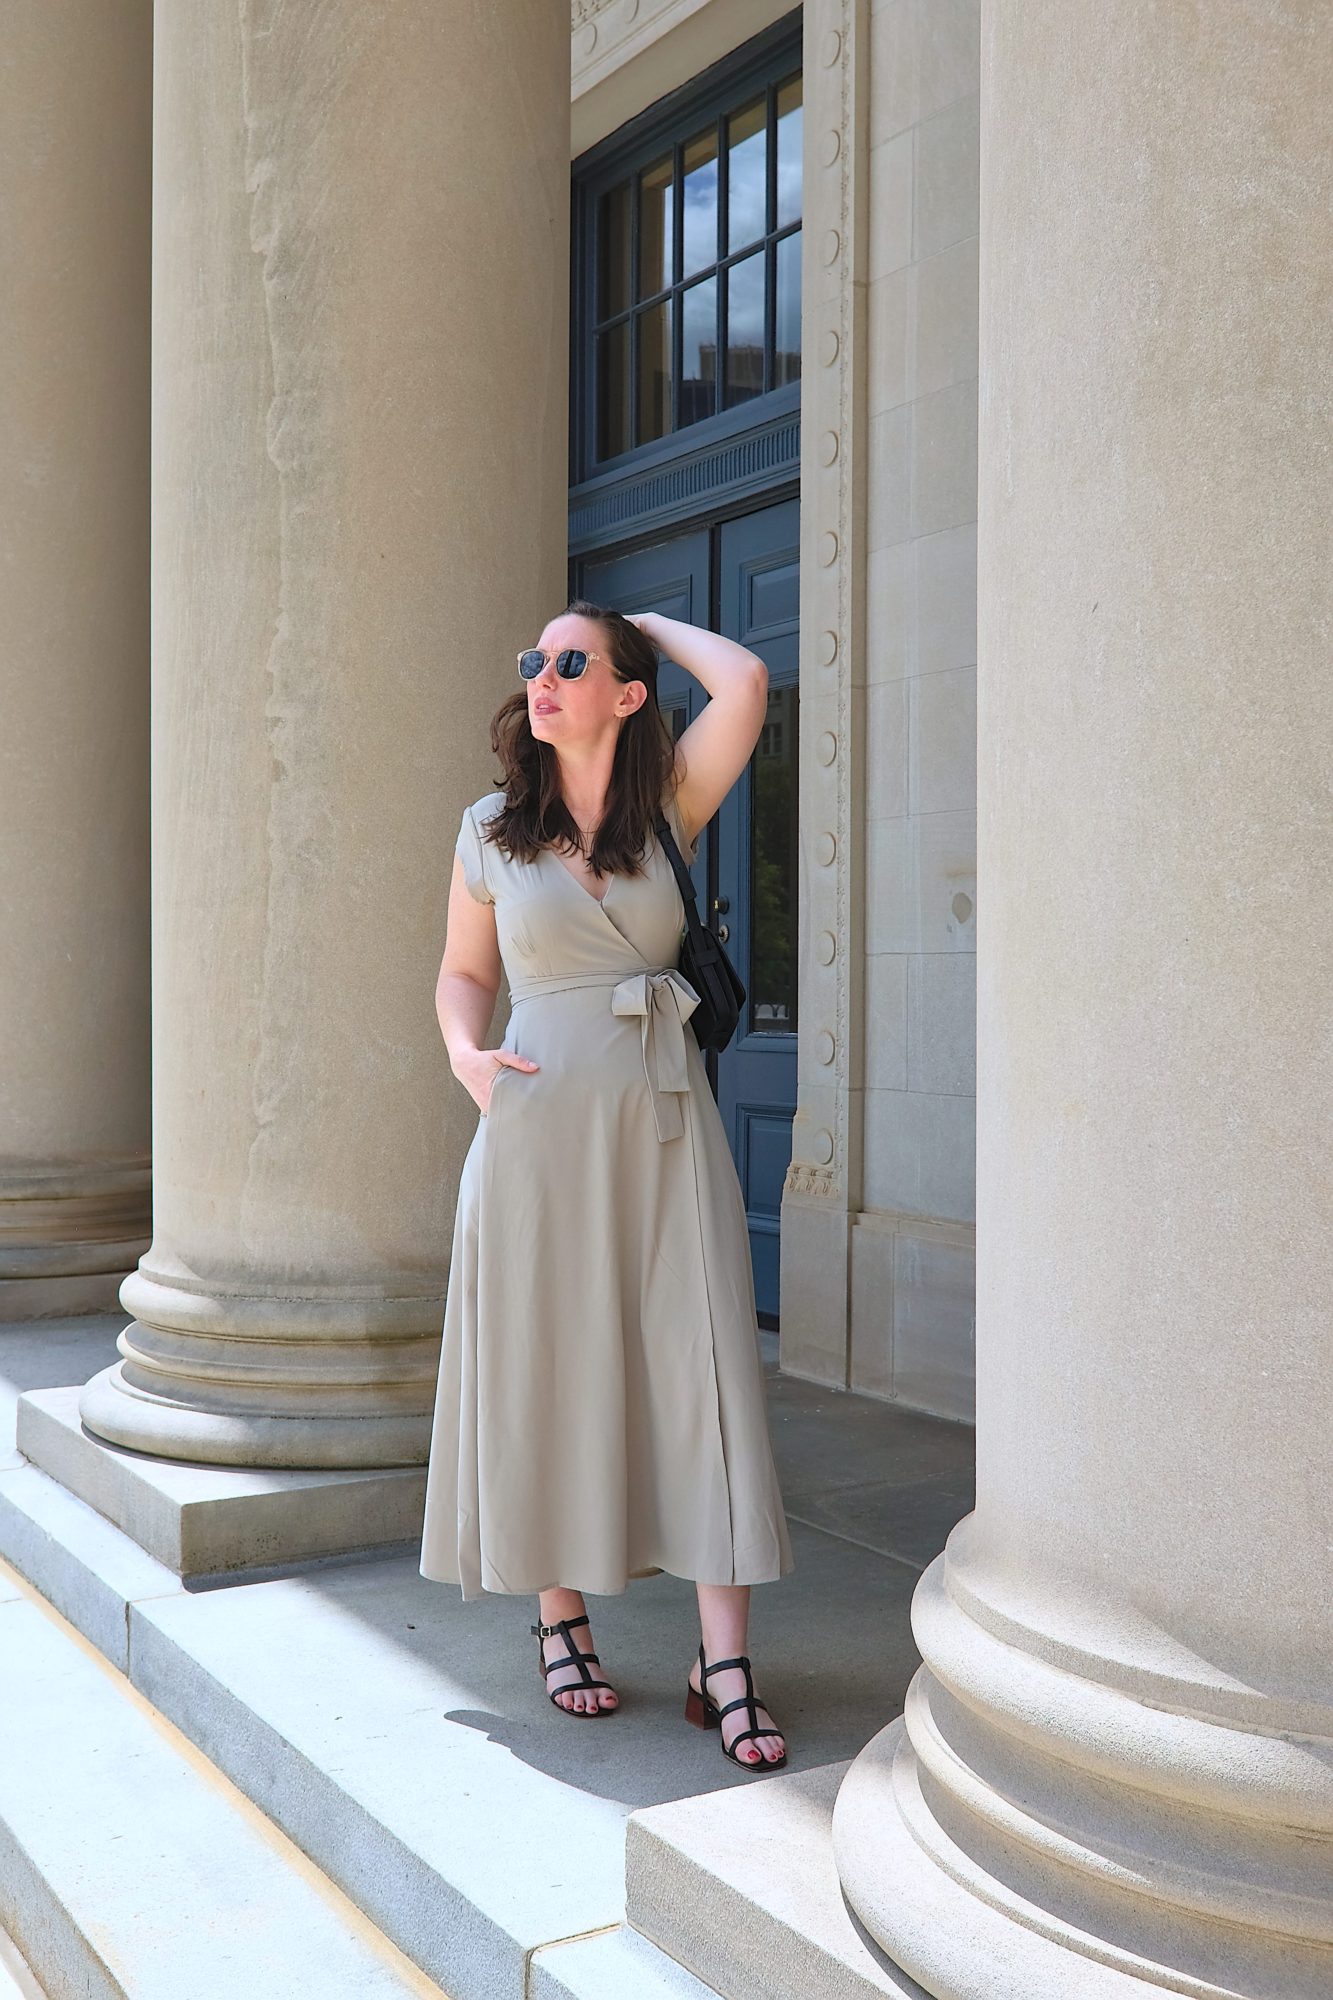 A Dress with Hidden Pockets: A Review of The Roma Wrap Dress from